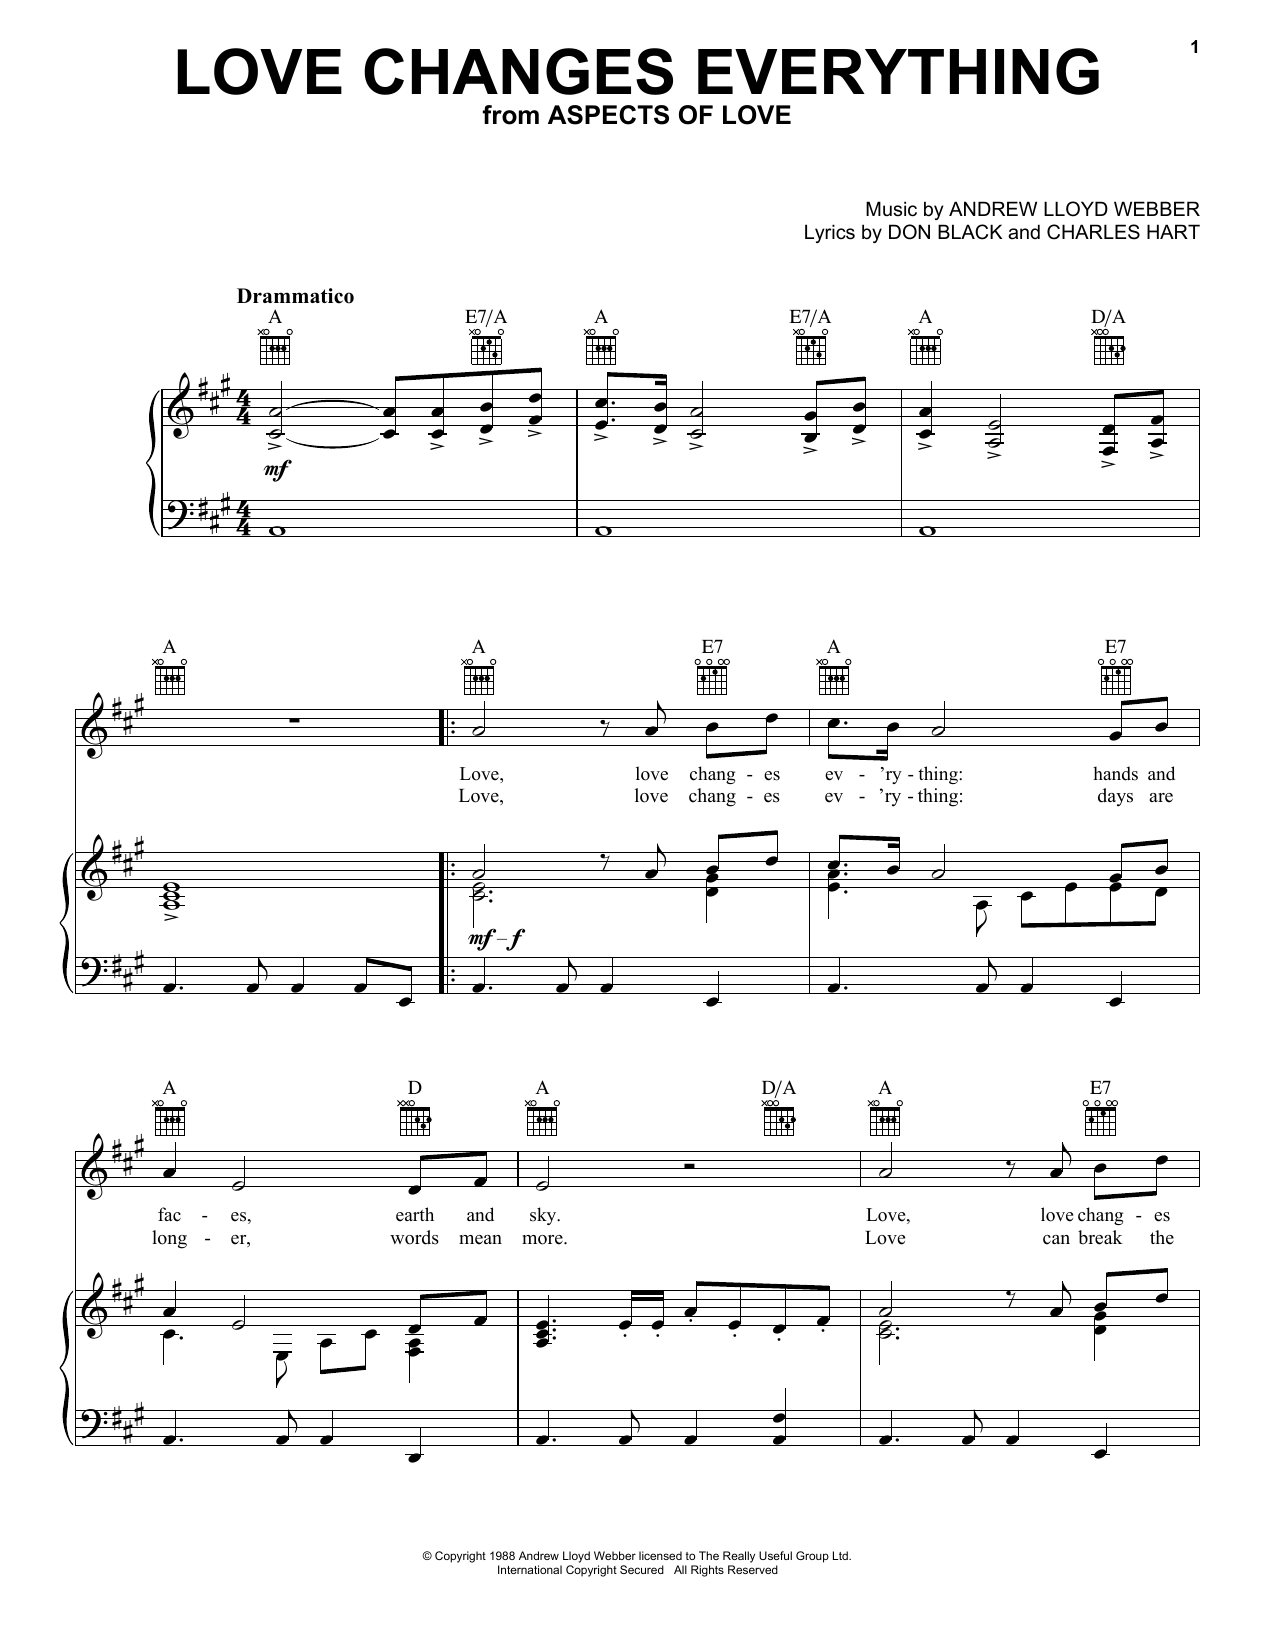 Andrew Lloyd Webber Love Changes Everything sheet music notes and chords. Download Printable PDF.